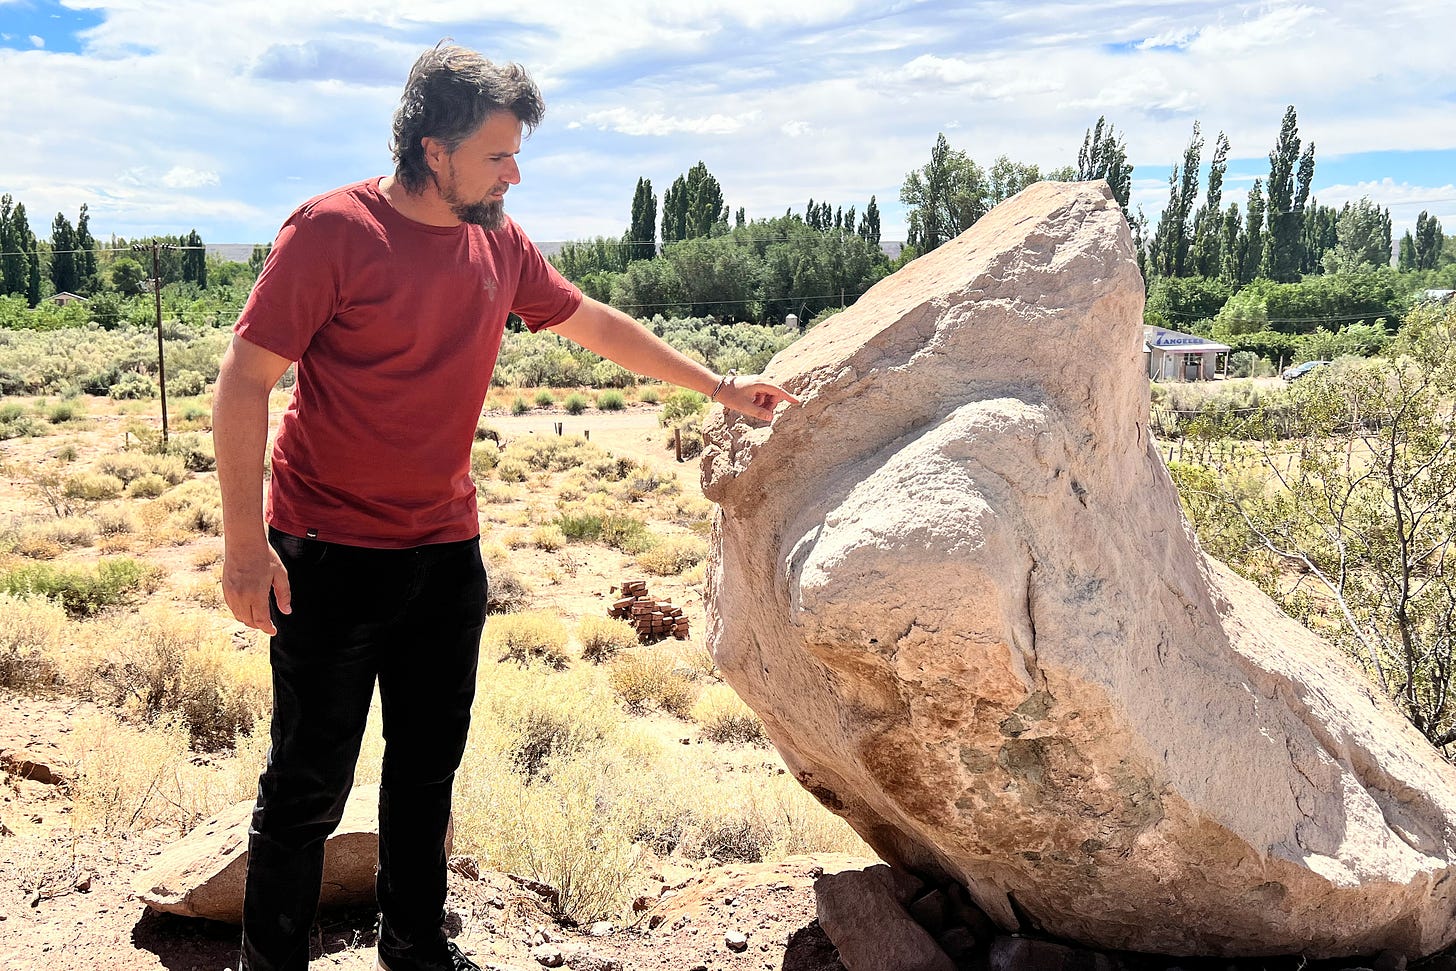 Javier Grosso points to a boulder that dislodged during one of the earthquakes that shook the town of Sauzal Bonito since fracking operations began nearby. Locals say they fear landslides could cause property damage if the seismic activity continues. Credit: Katie Surma/Inside Climate News